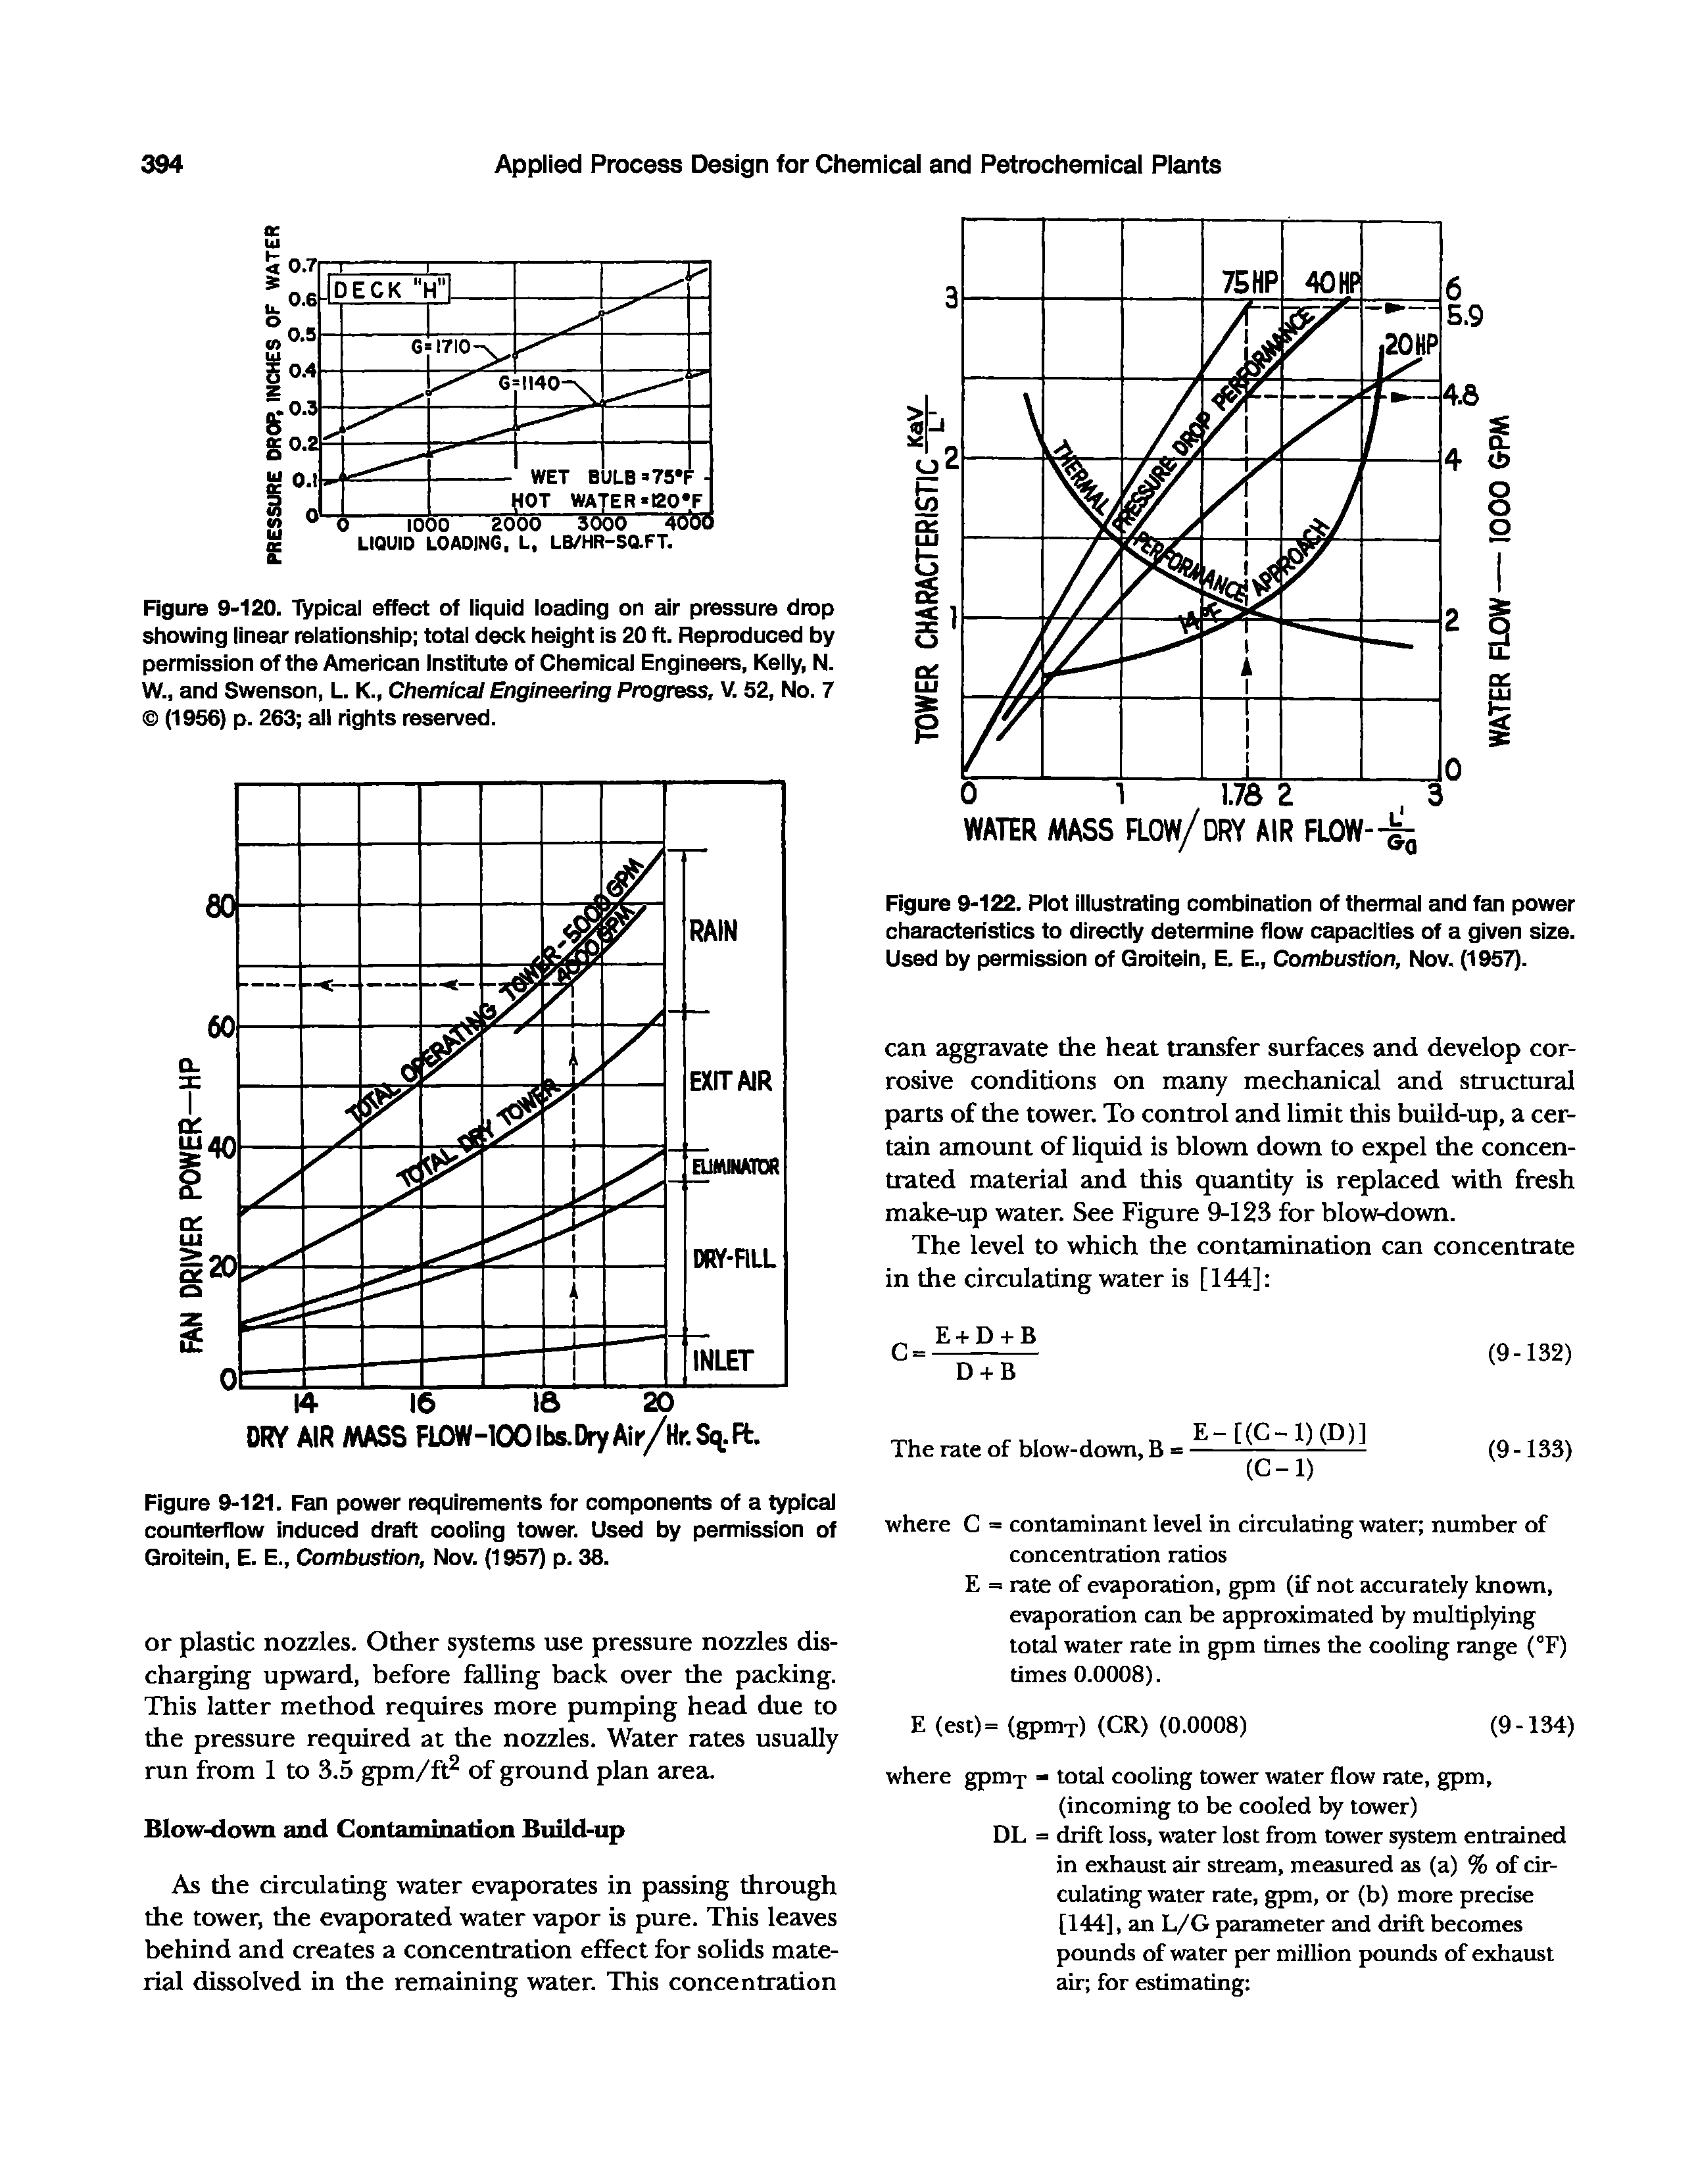 Figure 9-121. Fan power requirements for components of a typical counterfiow induced draft cooling tower. Used by permission of Groitein, E. E., Combustion, Nov. (1957) p. 38.